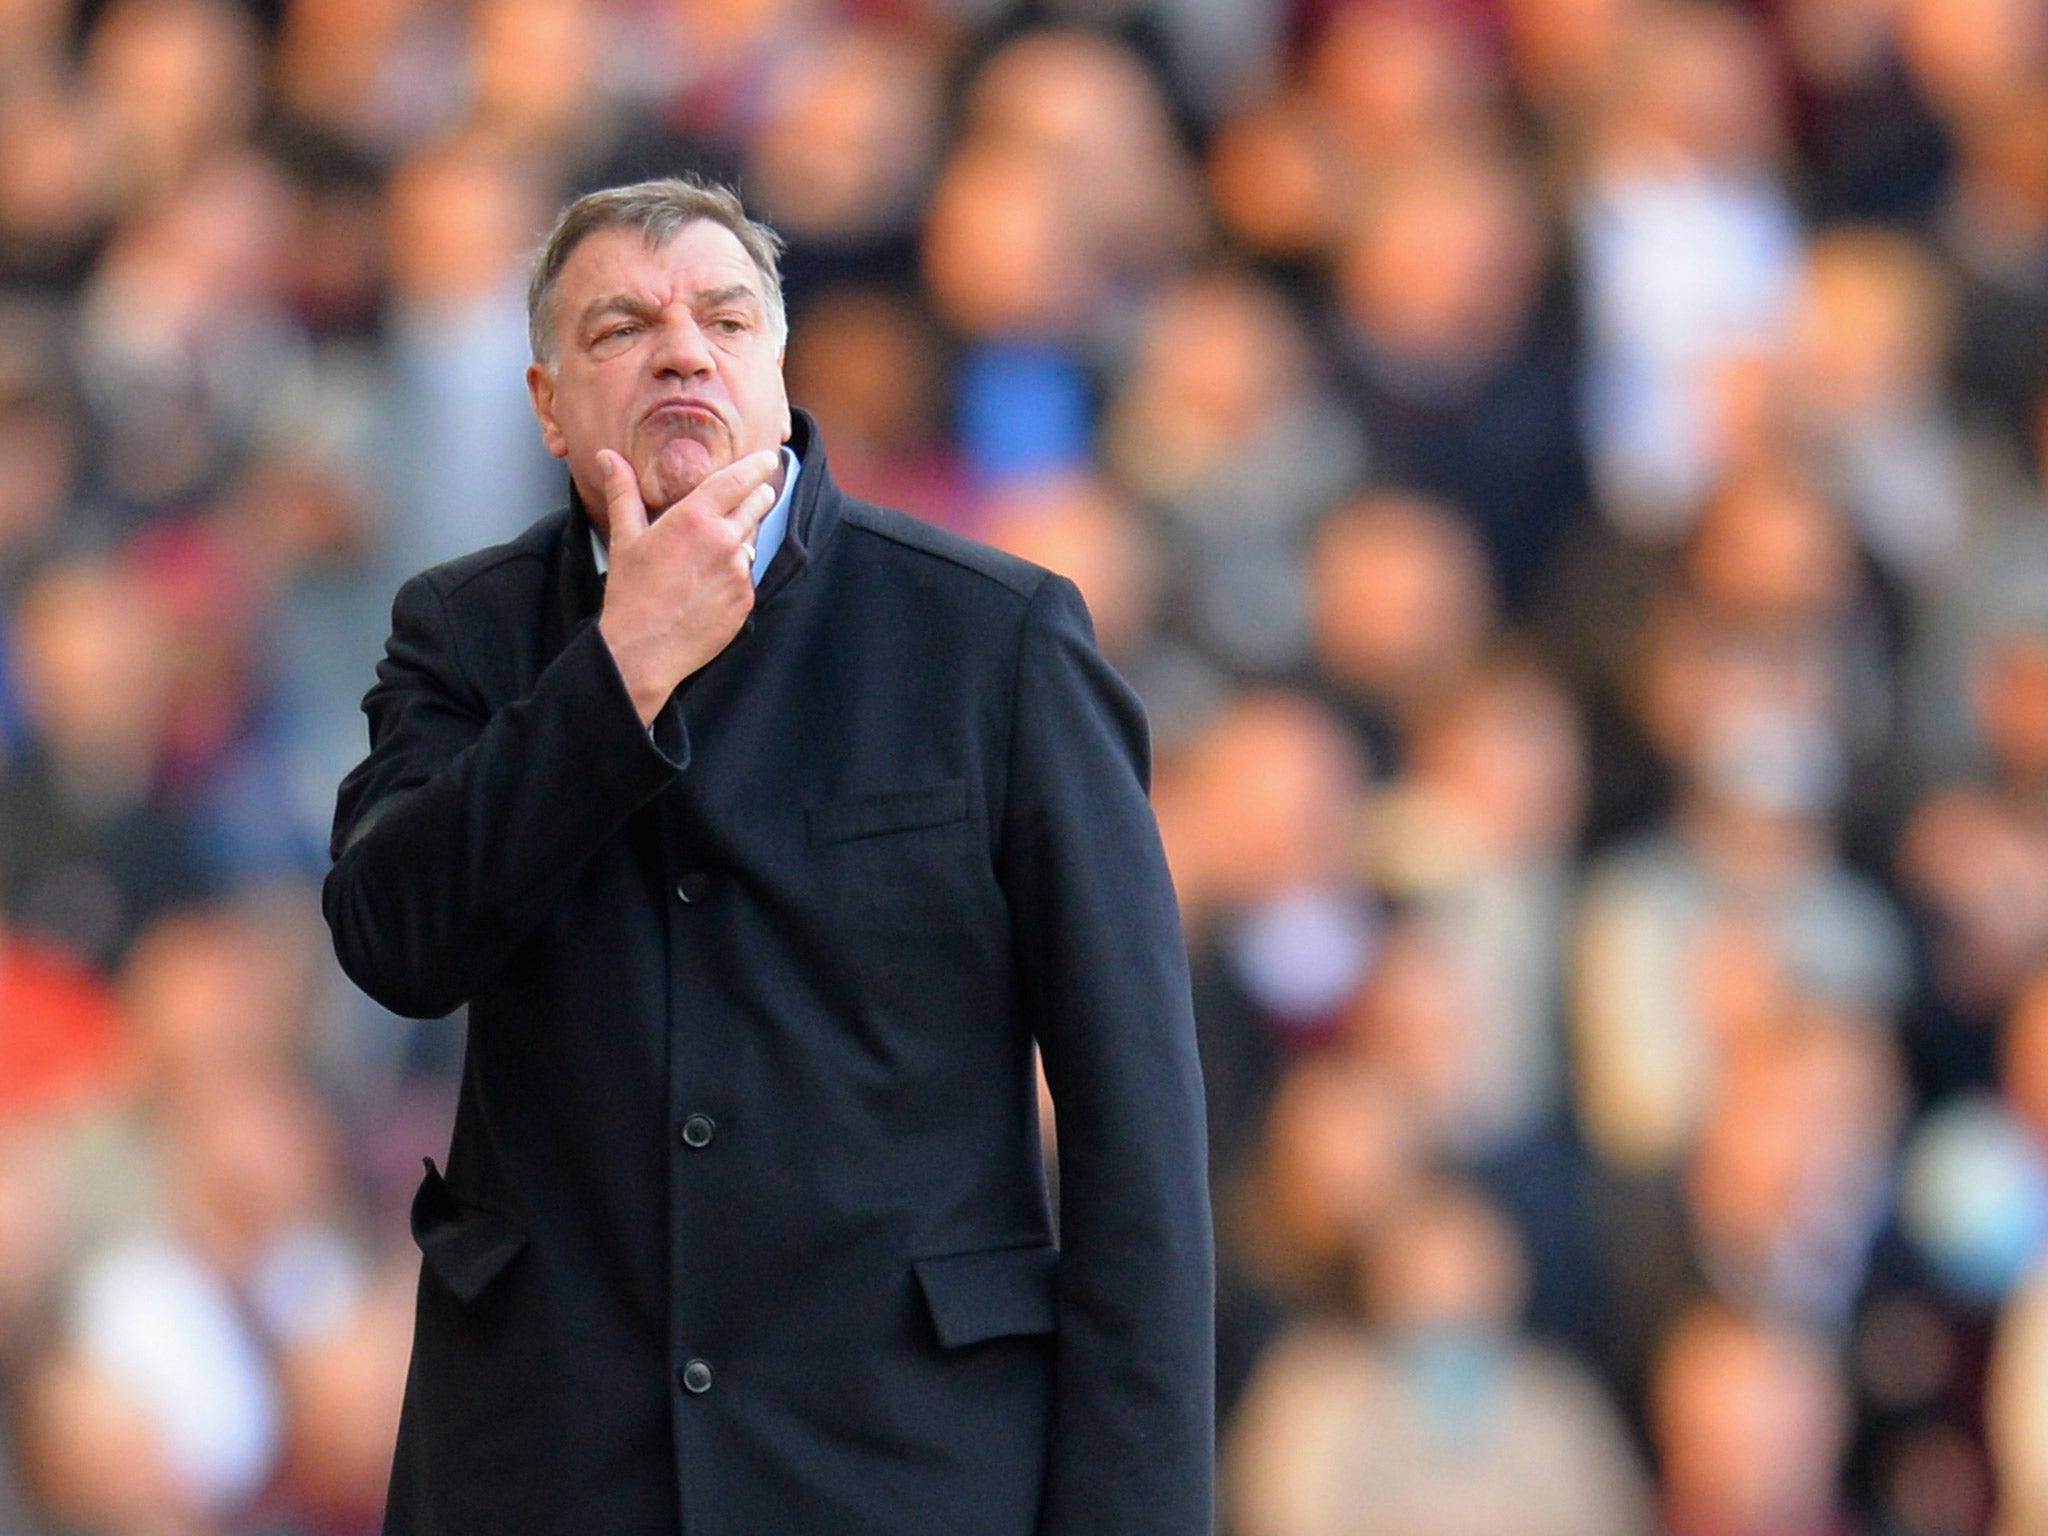 Sam Allardyce and The Football Association mutually agreed to terminate his contract following conduct judged to be 'inappropriate of the England manager'